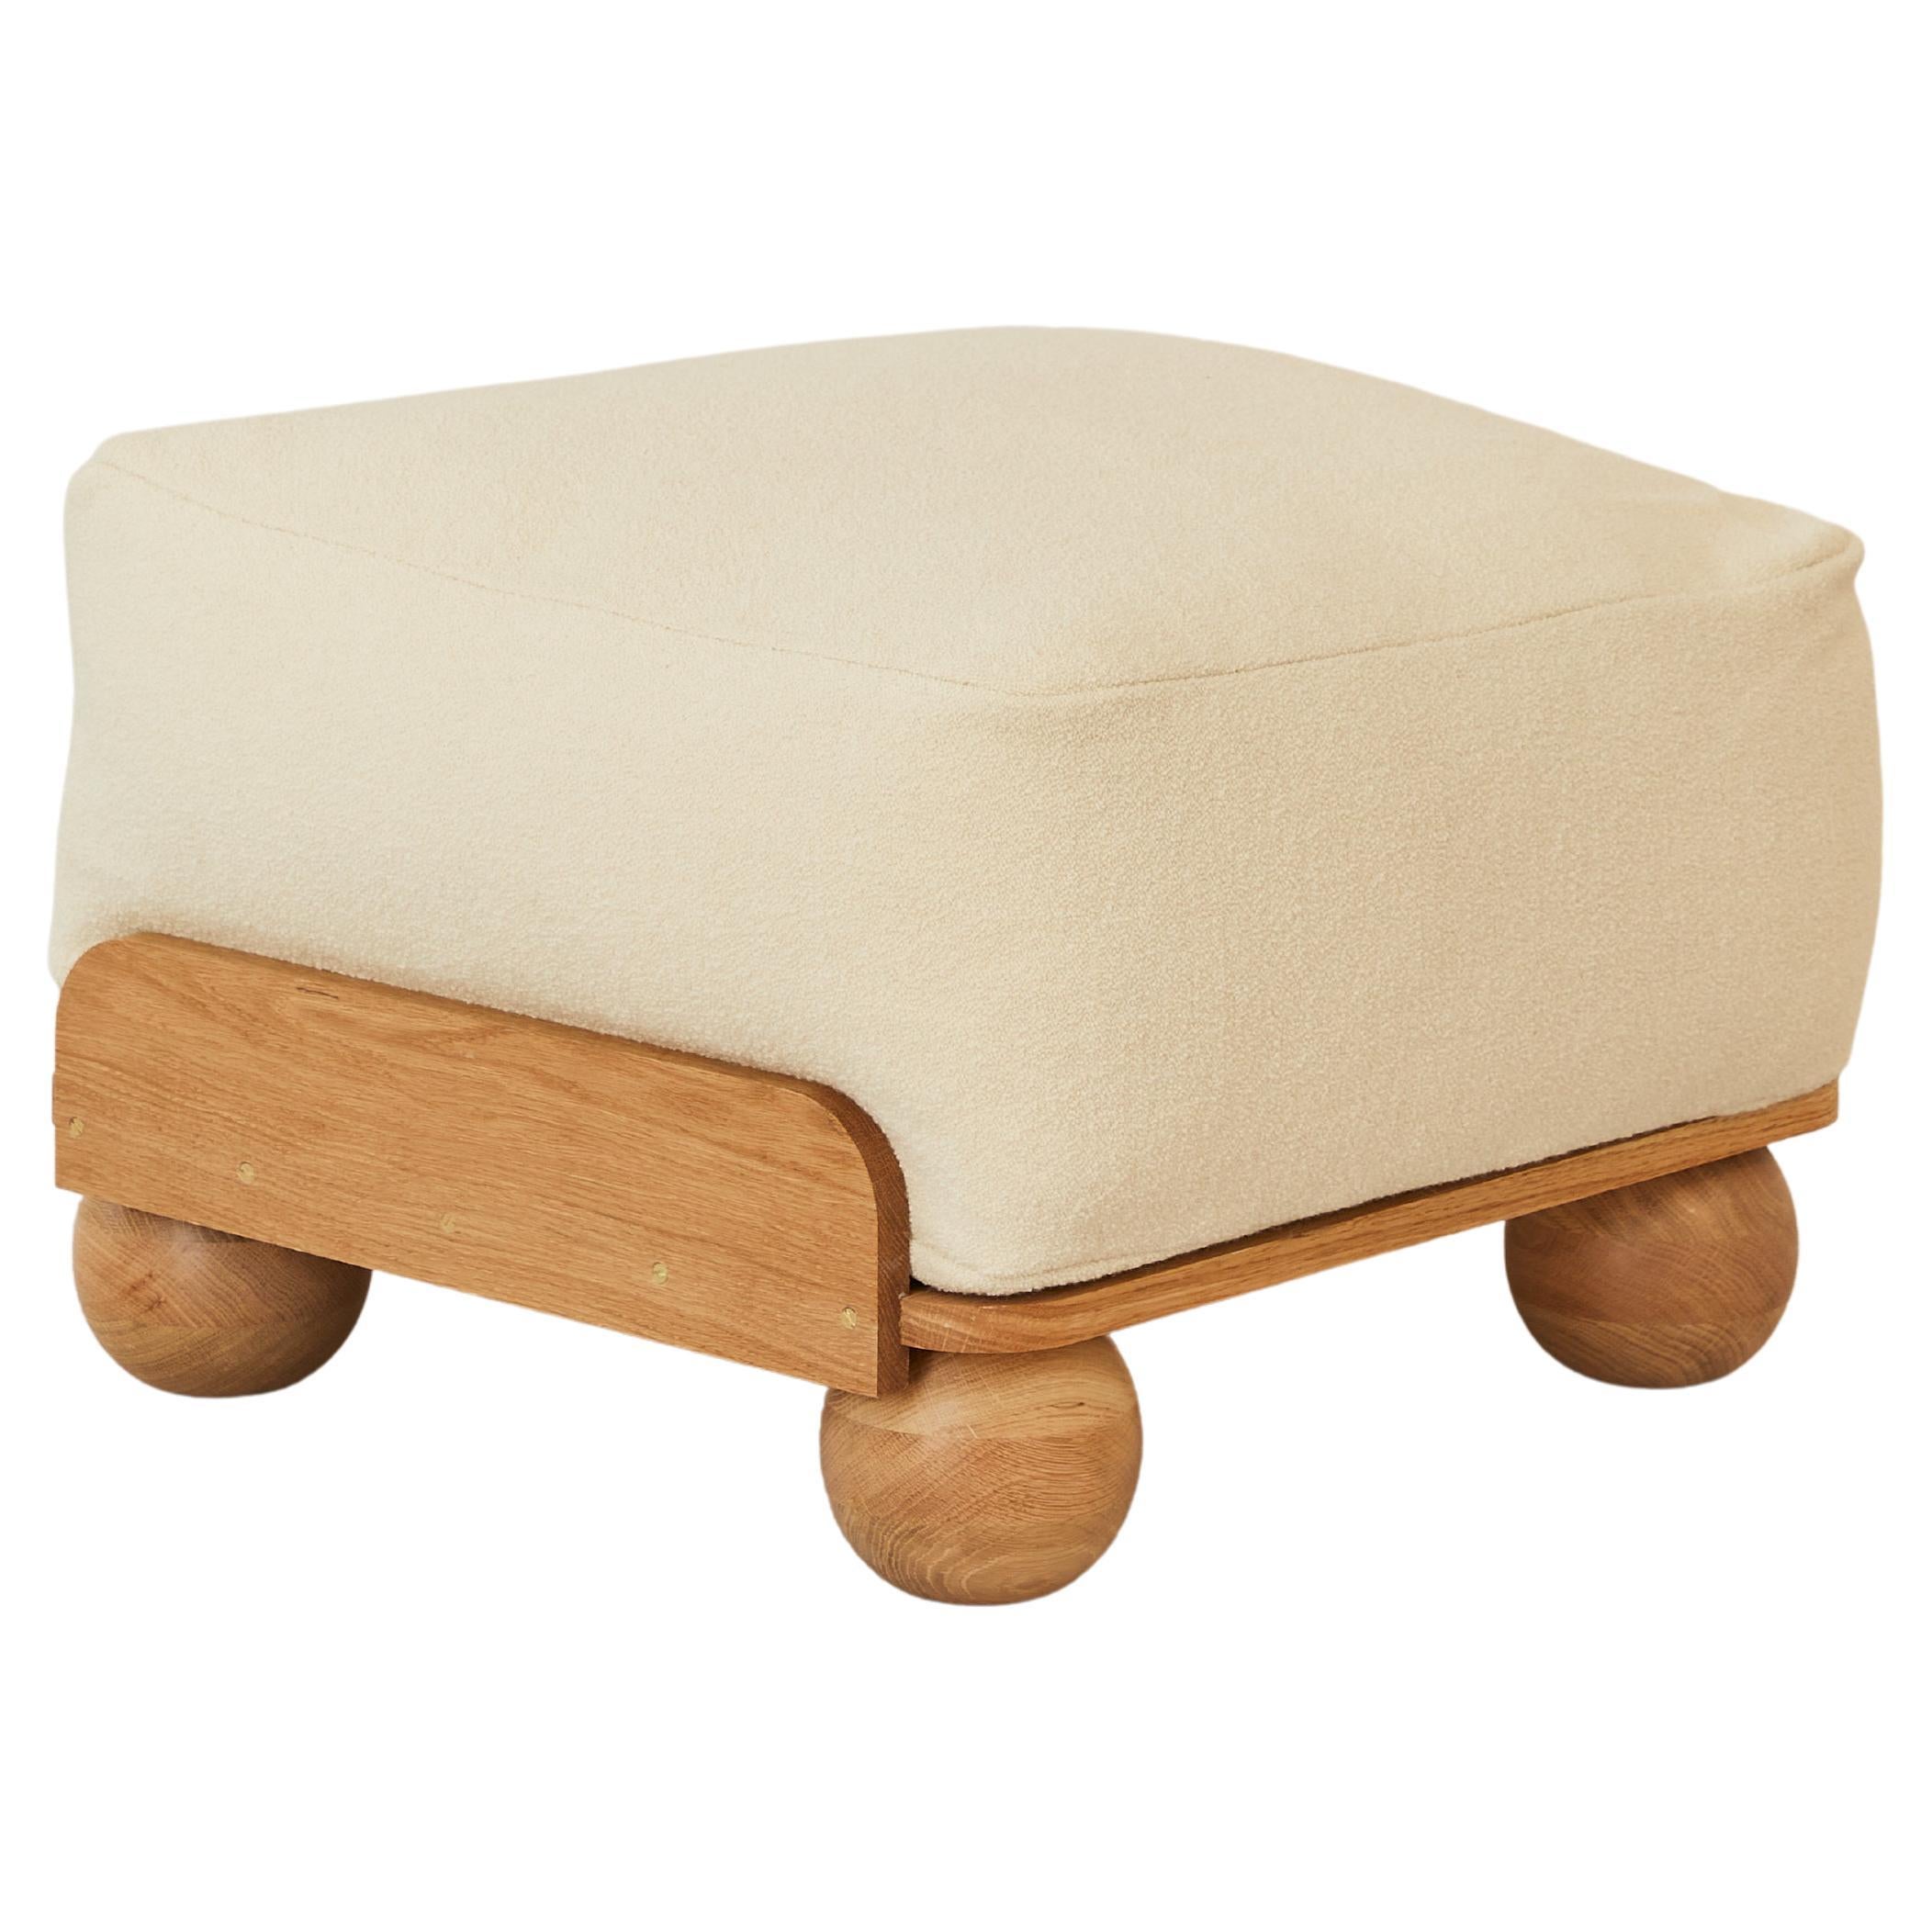 Cove Footstool in Chalk White For Sale